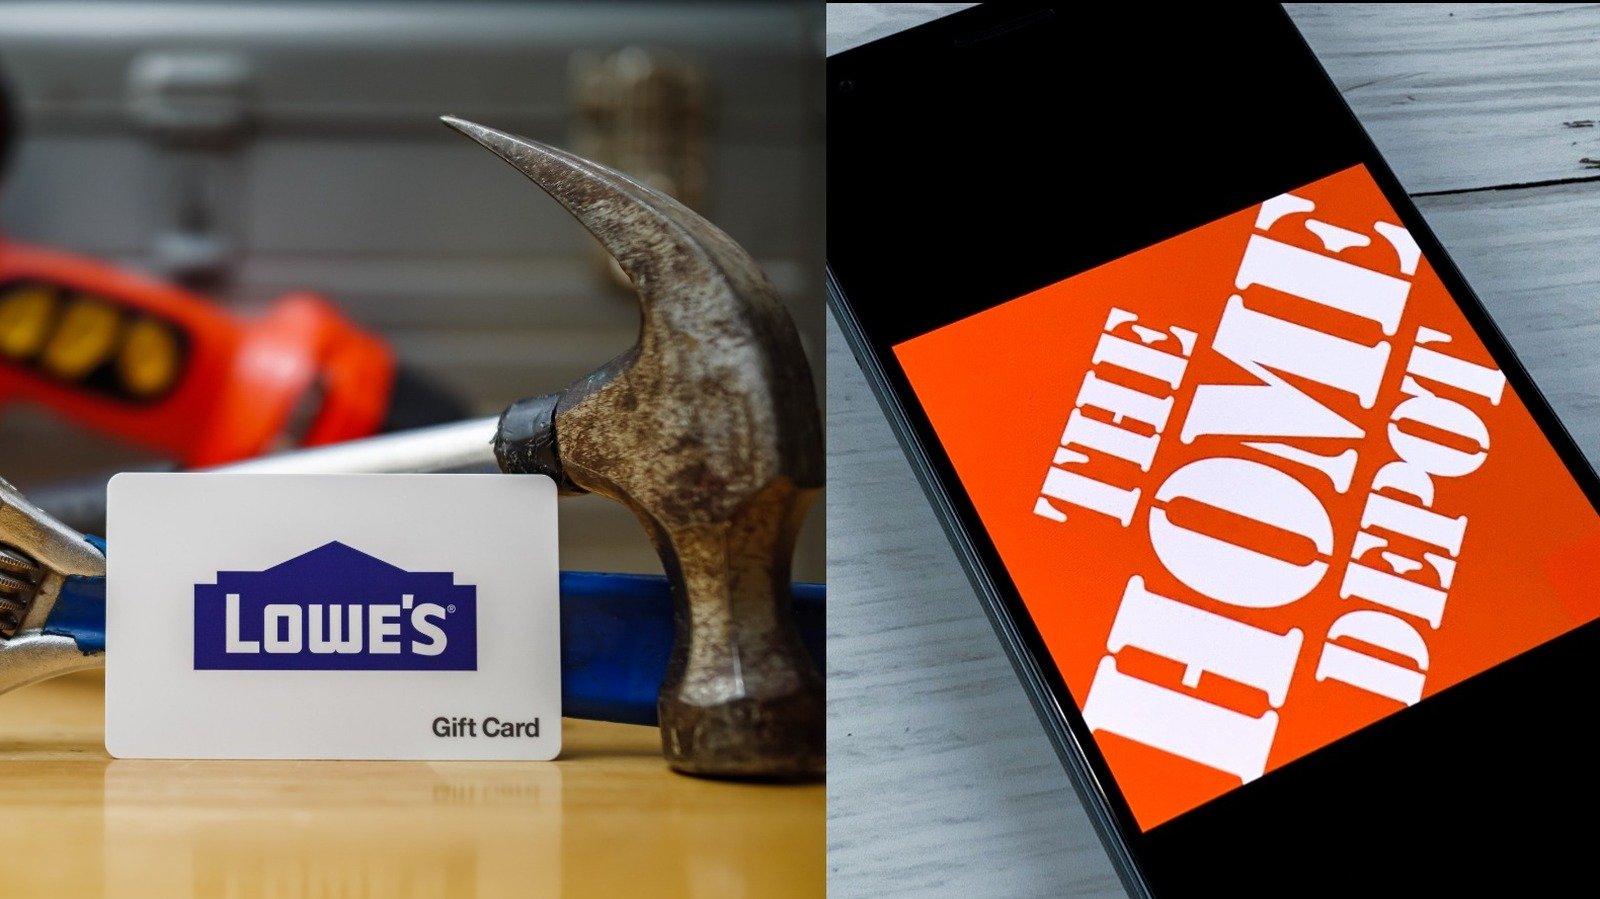 What's The Difference? Lowe's Vs. Home Depot - House Digest